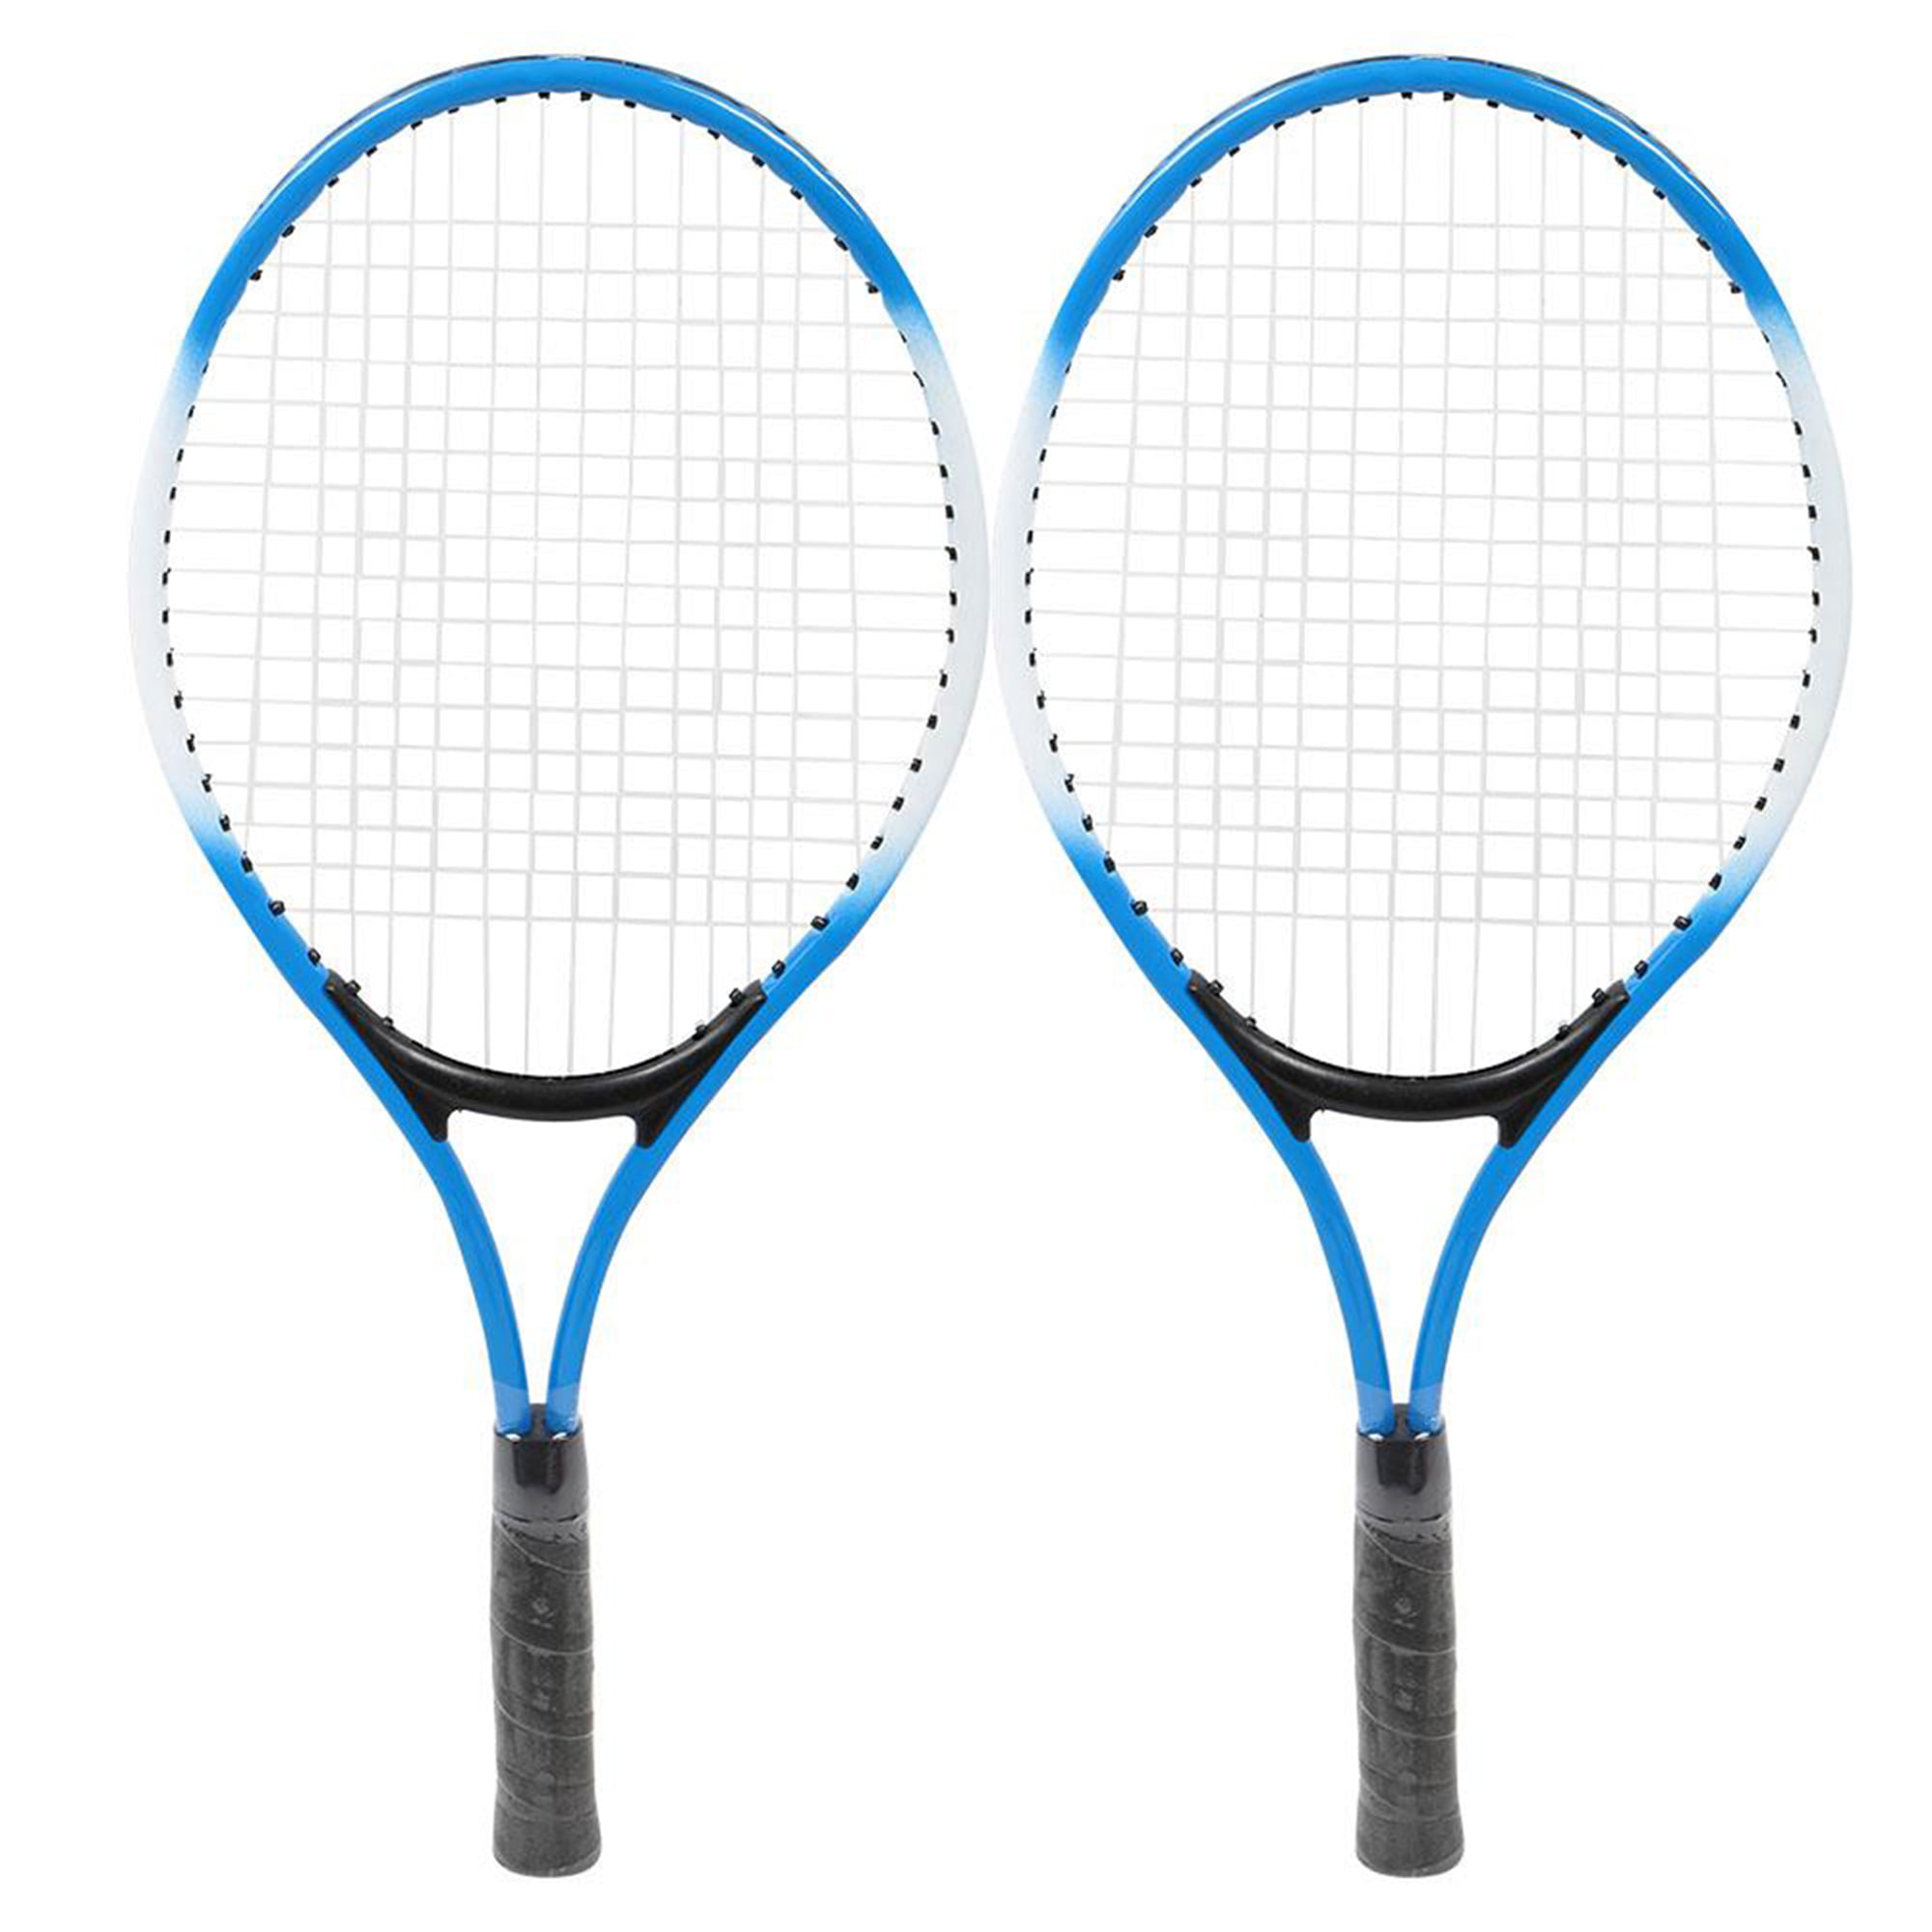 2Pcs Kids Tennis Racket String Tennis Racquets with 1 Tennis Ball and Cover Bag 